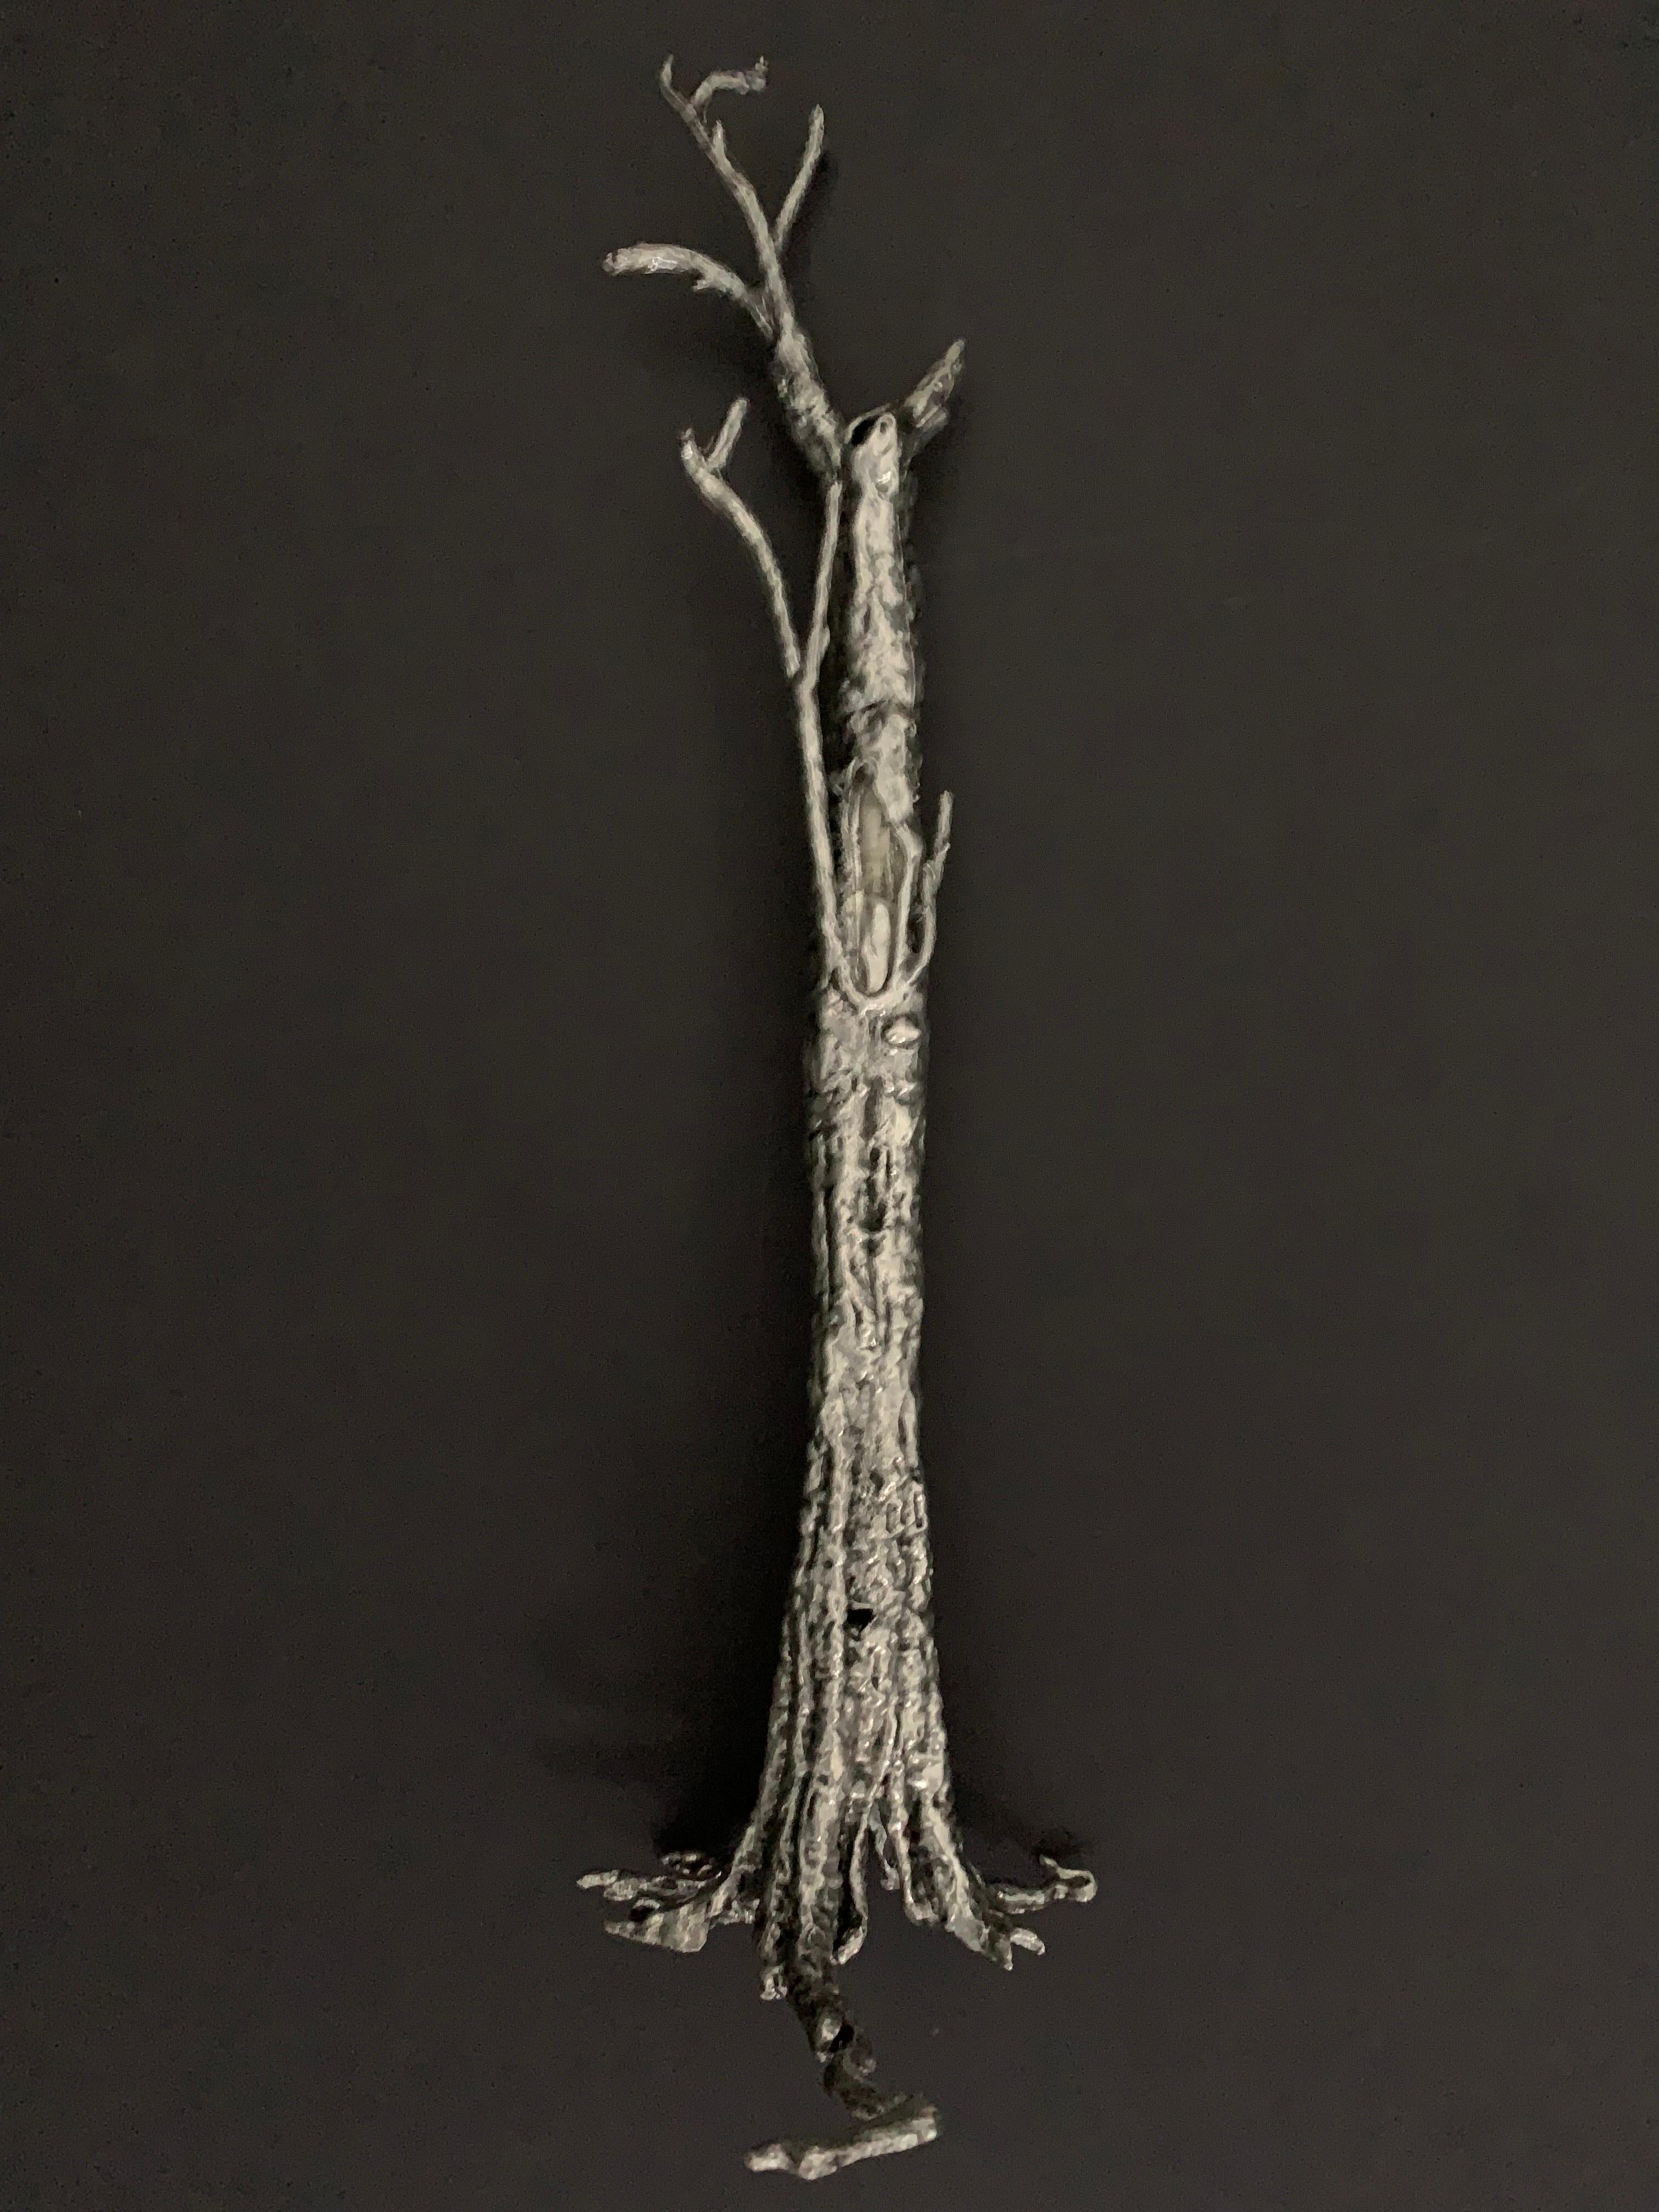 Ai Weiwei Pequi Tree Minature Tin Sculpture 1/100 Scale Edition of 250 For Sale 2